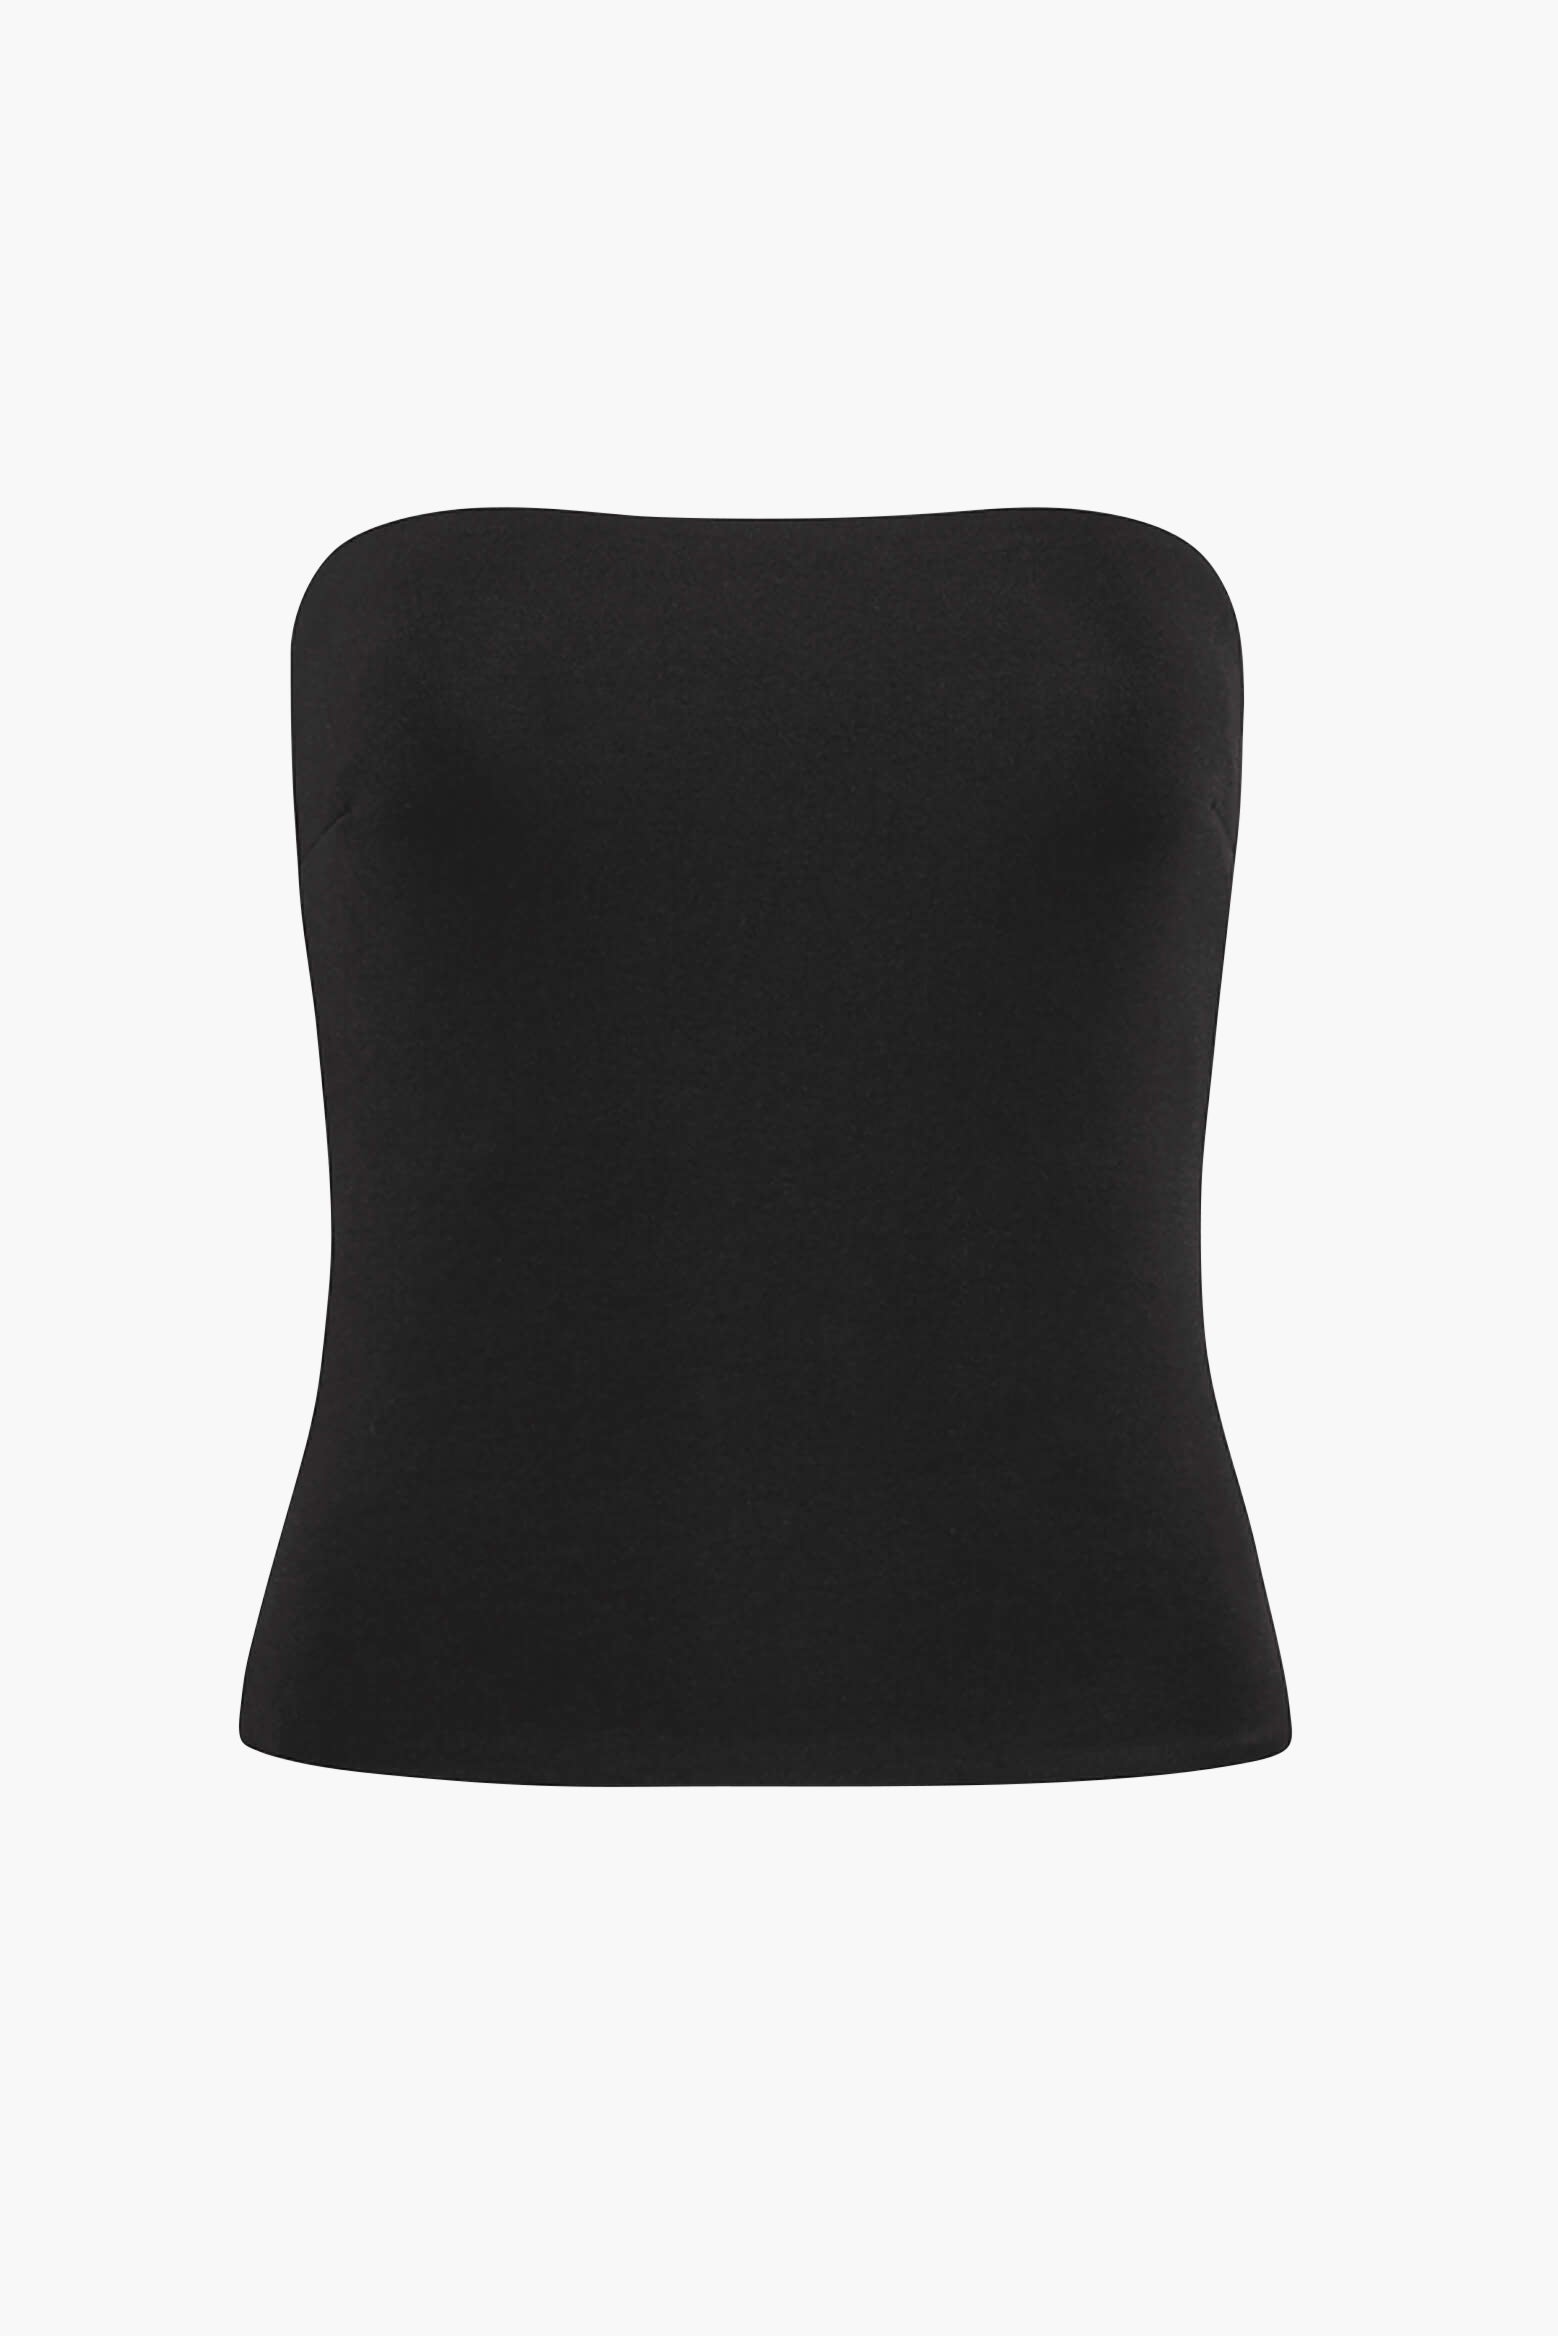 Esse Studios Strapless Black Top from The New Trend